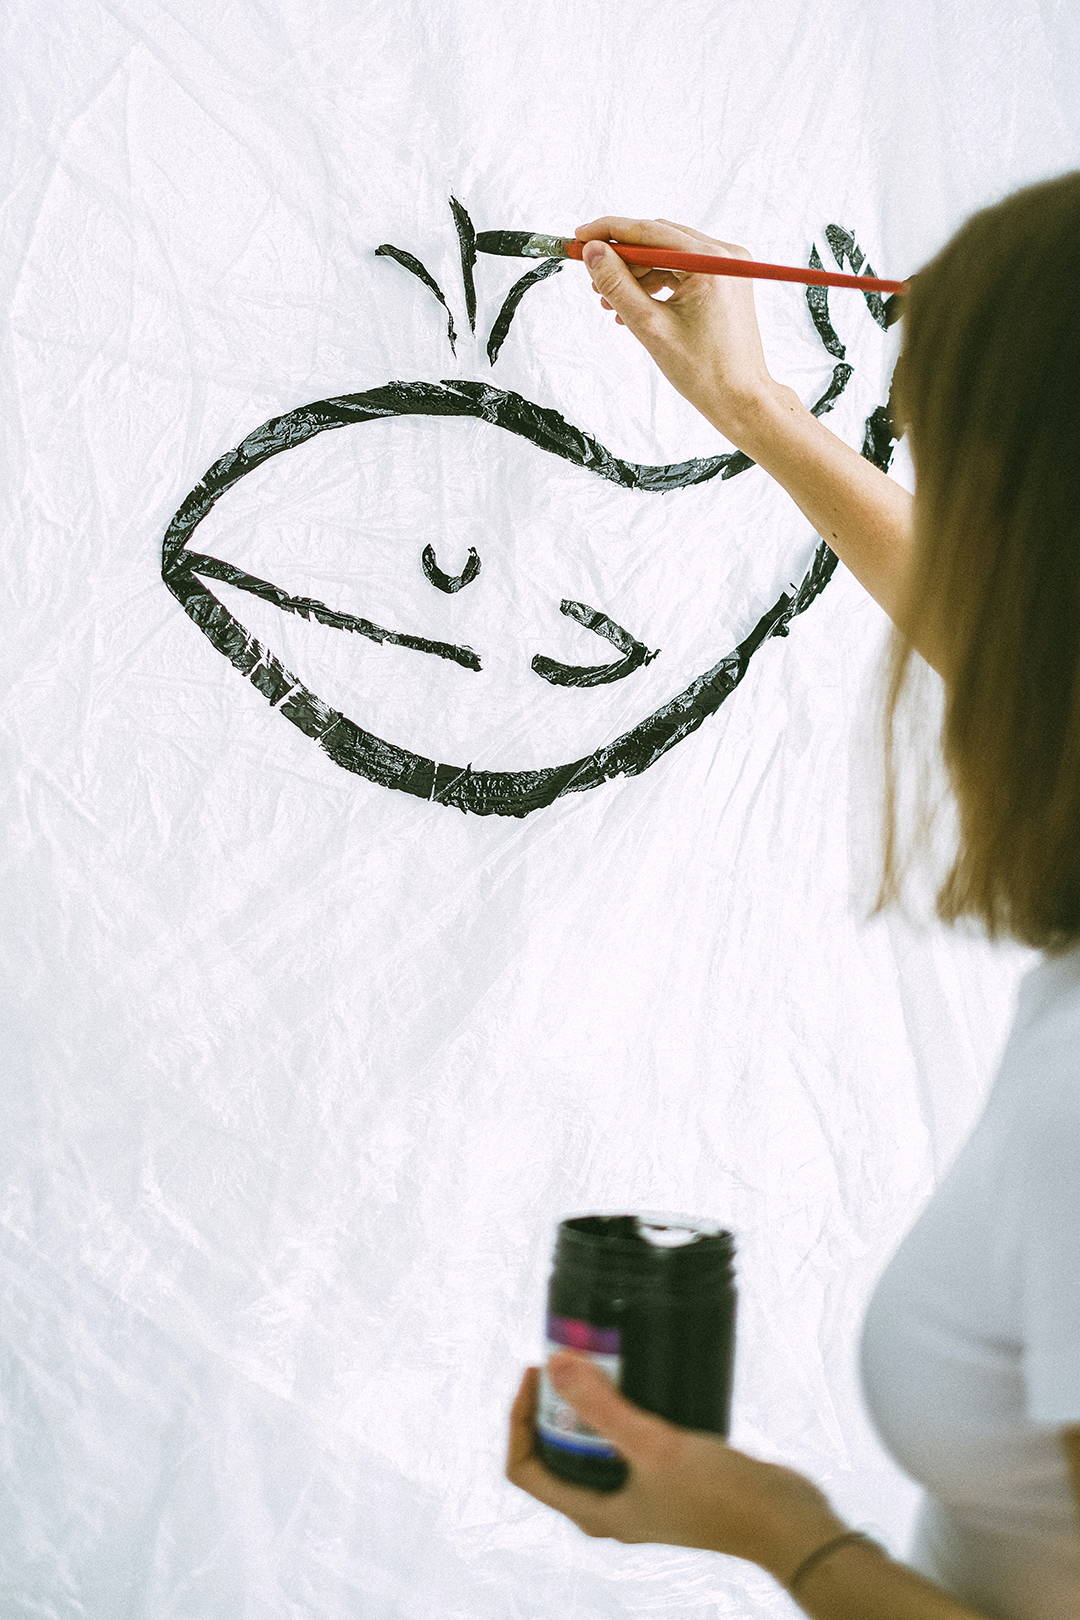  Sustainable painting is a great way of self-expression using natural paint